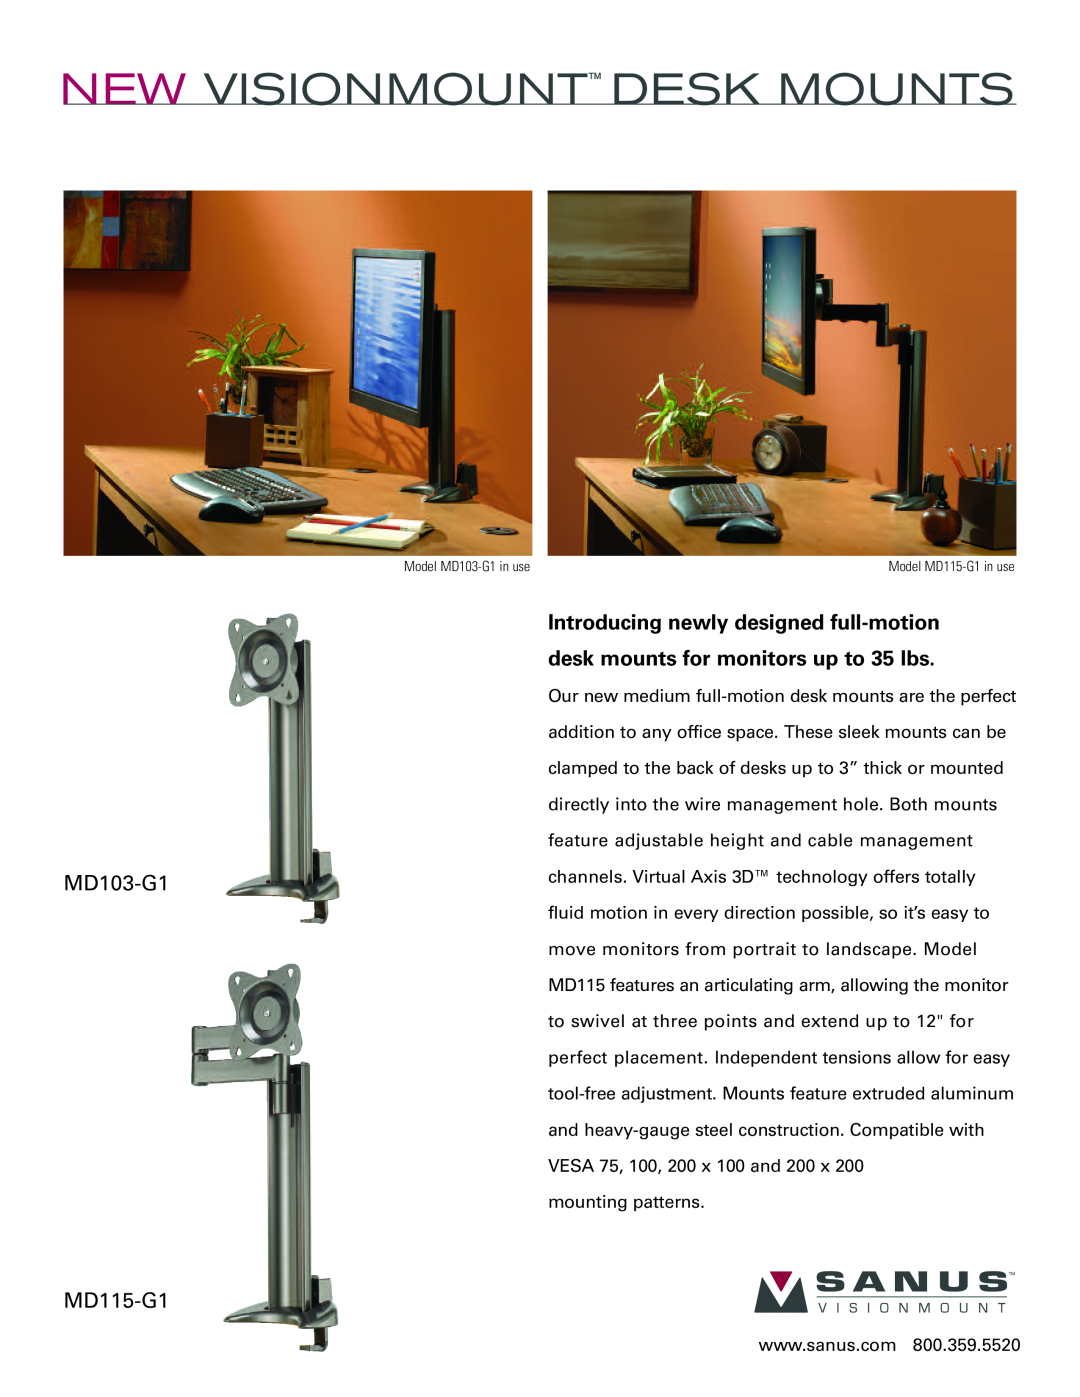 Sanus Systems manual New Visionmount Desk Mounts, MD103-G1 MD115-G1, Introducing newly designed full-motion 